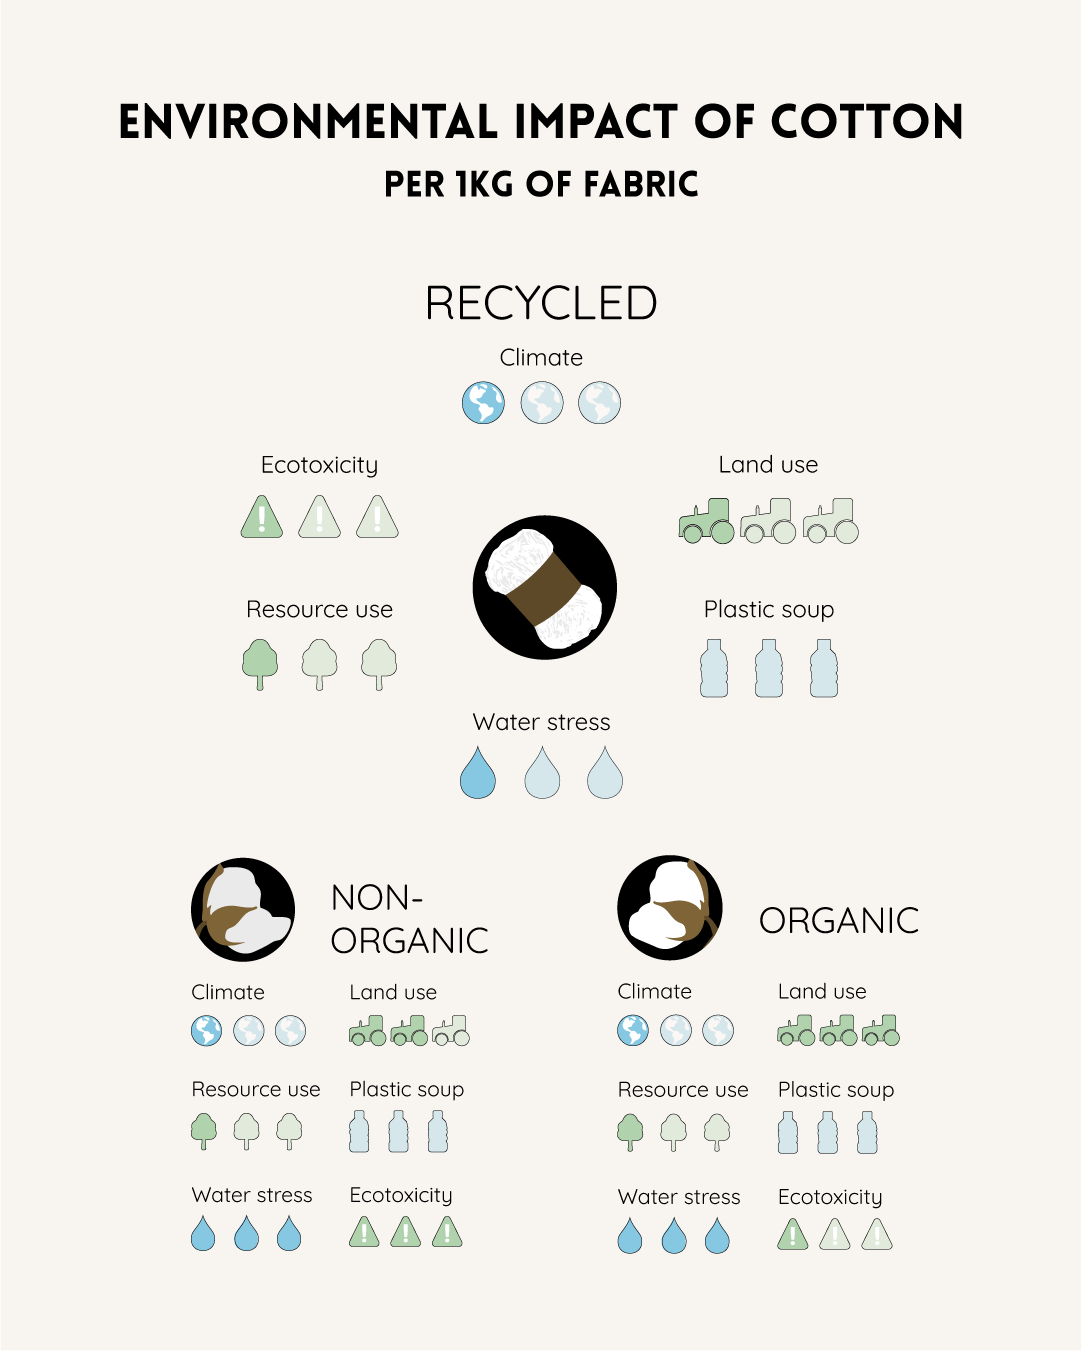 impact of cotton recycled organic non-organic on the environment